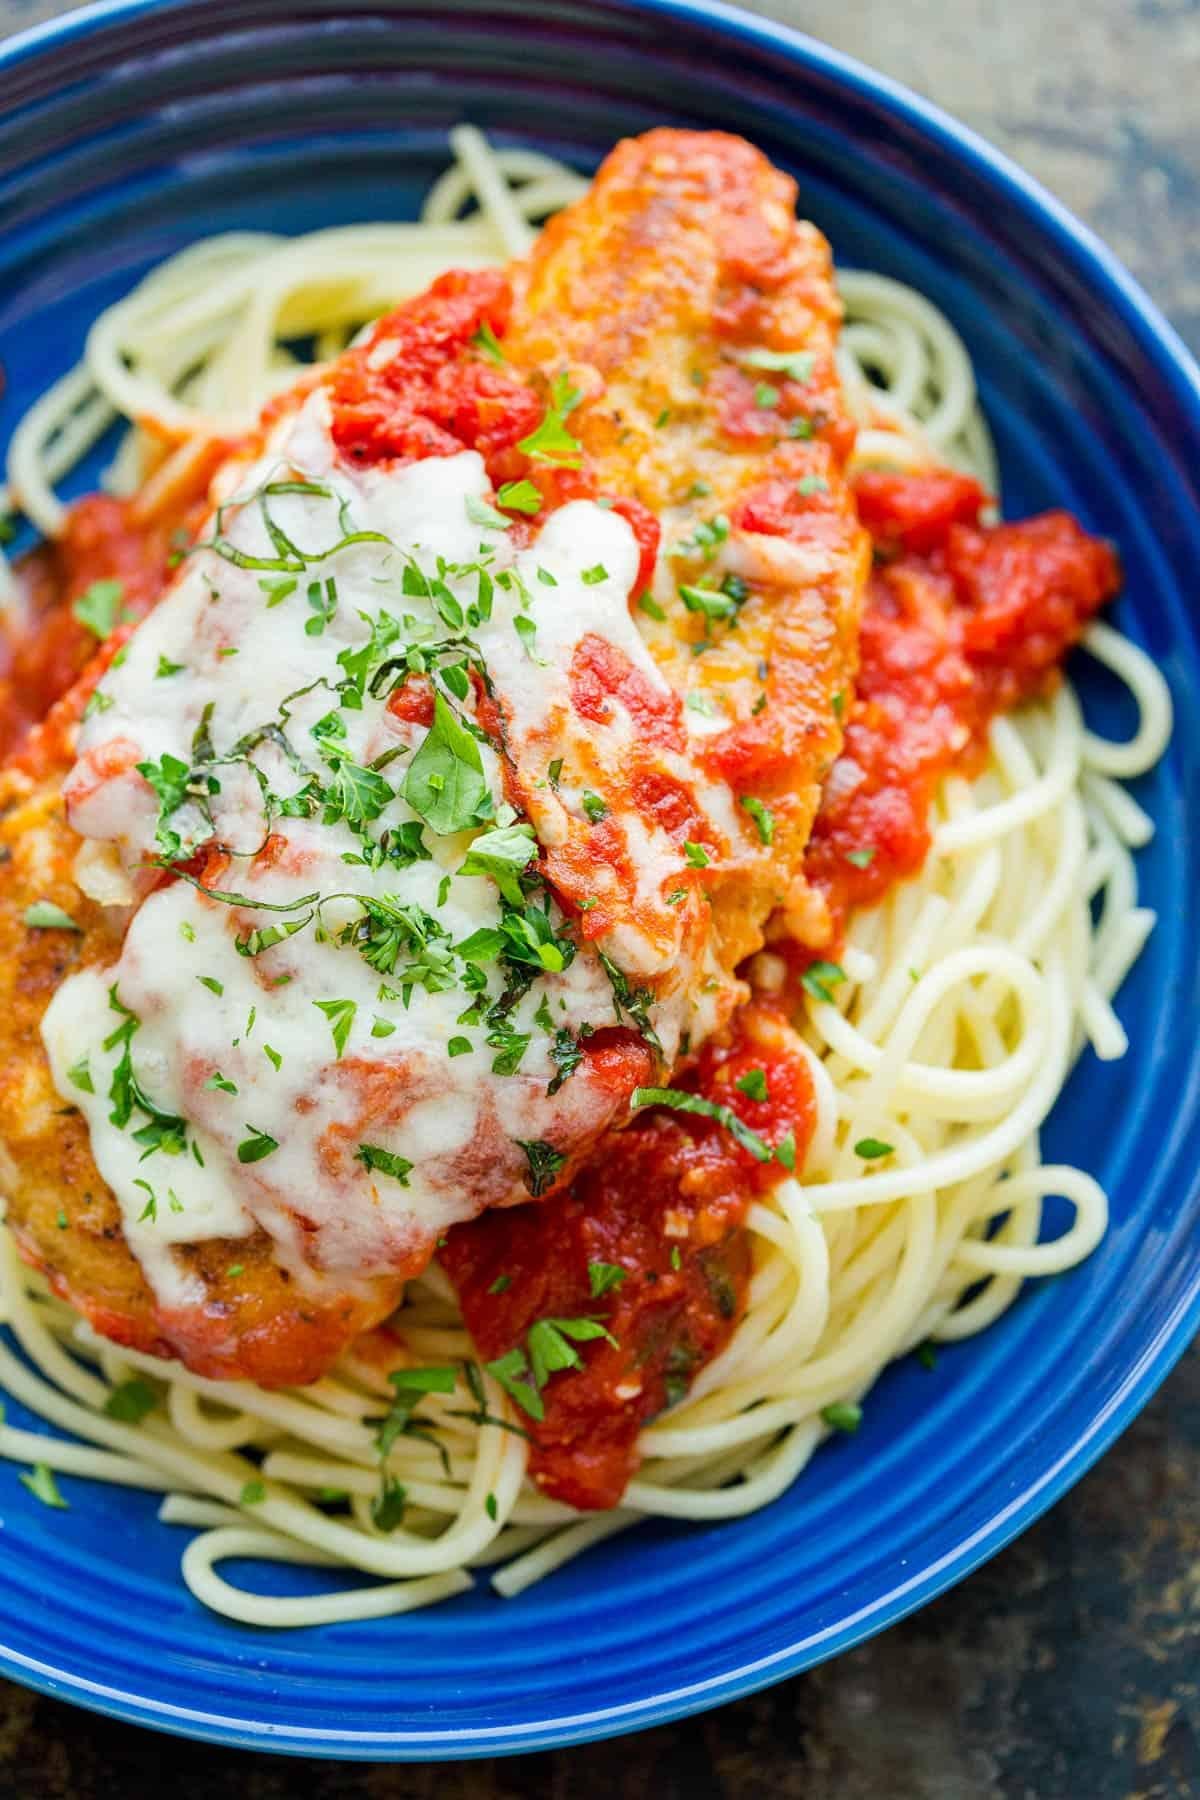 Deliciously Simple Chicken Parmesan Recipe to Impress Your Guests